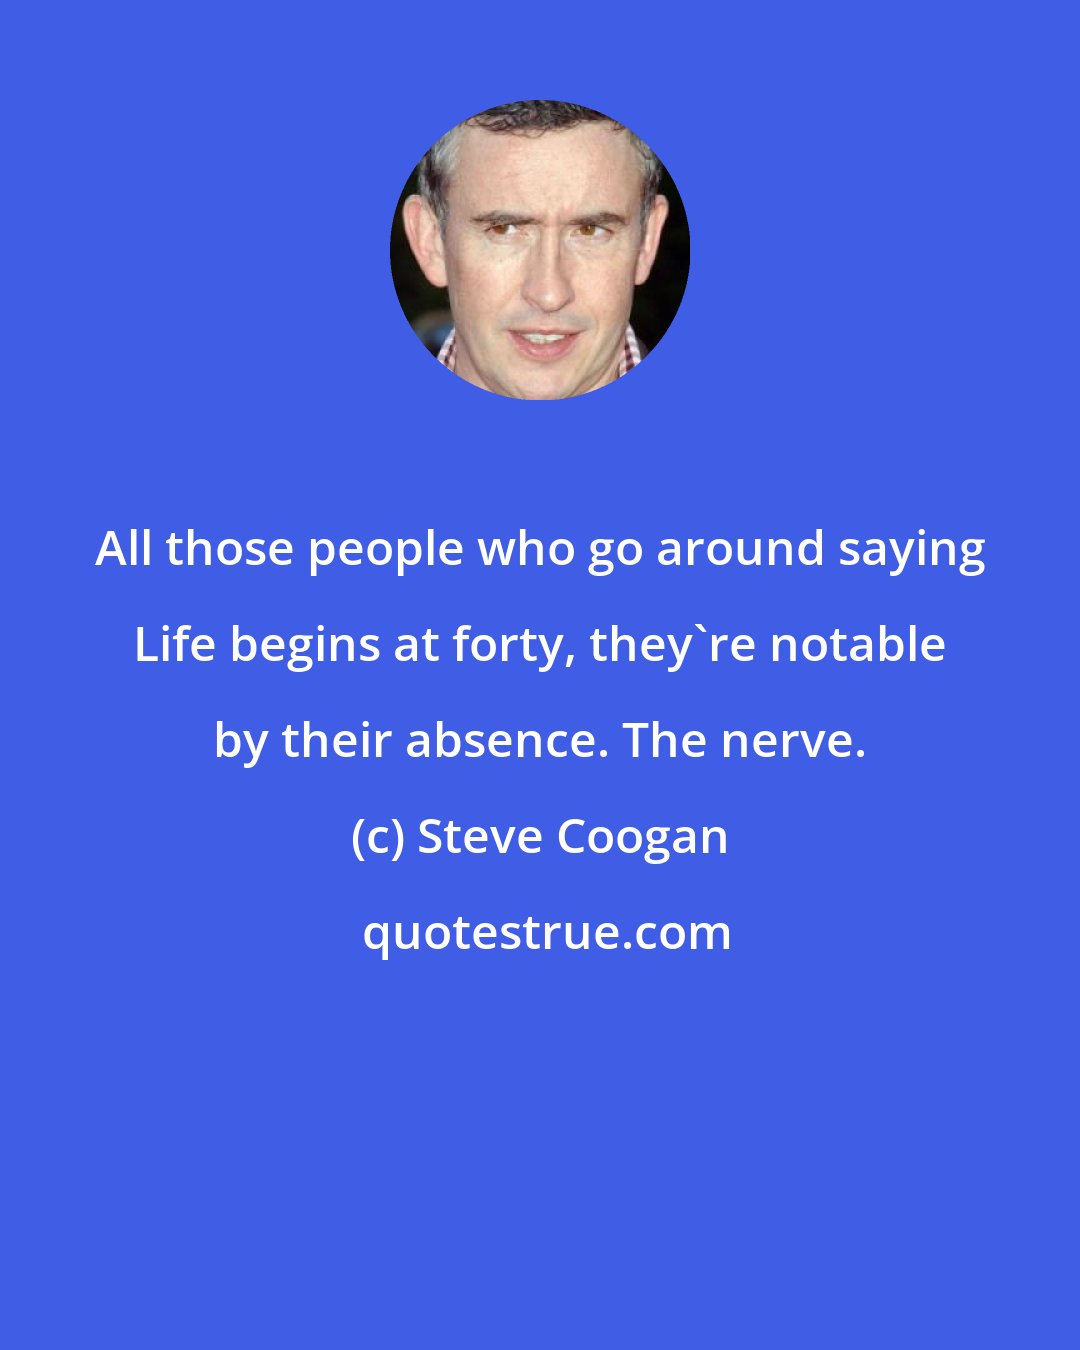 Steve Coogan: All those people who go around saying Life begins at forty, they're notable by their absence. The nerve.